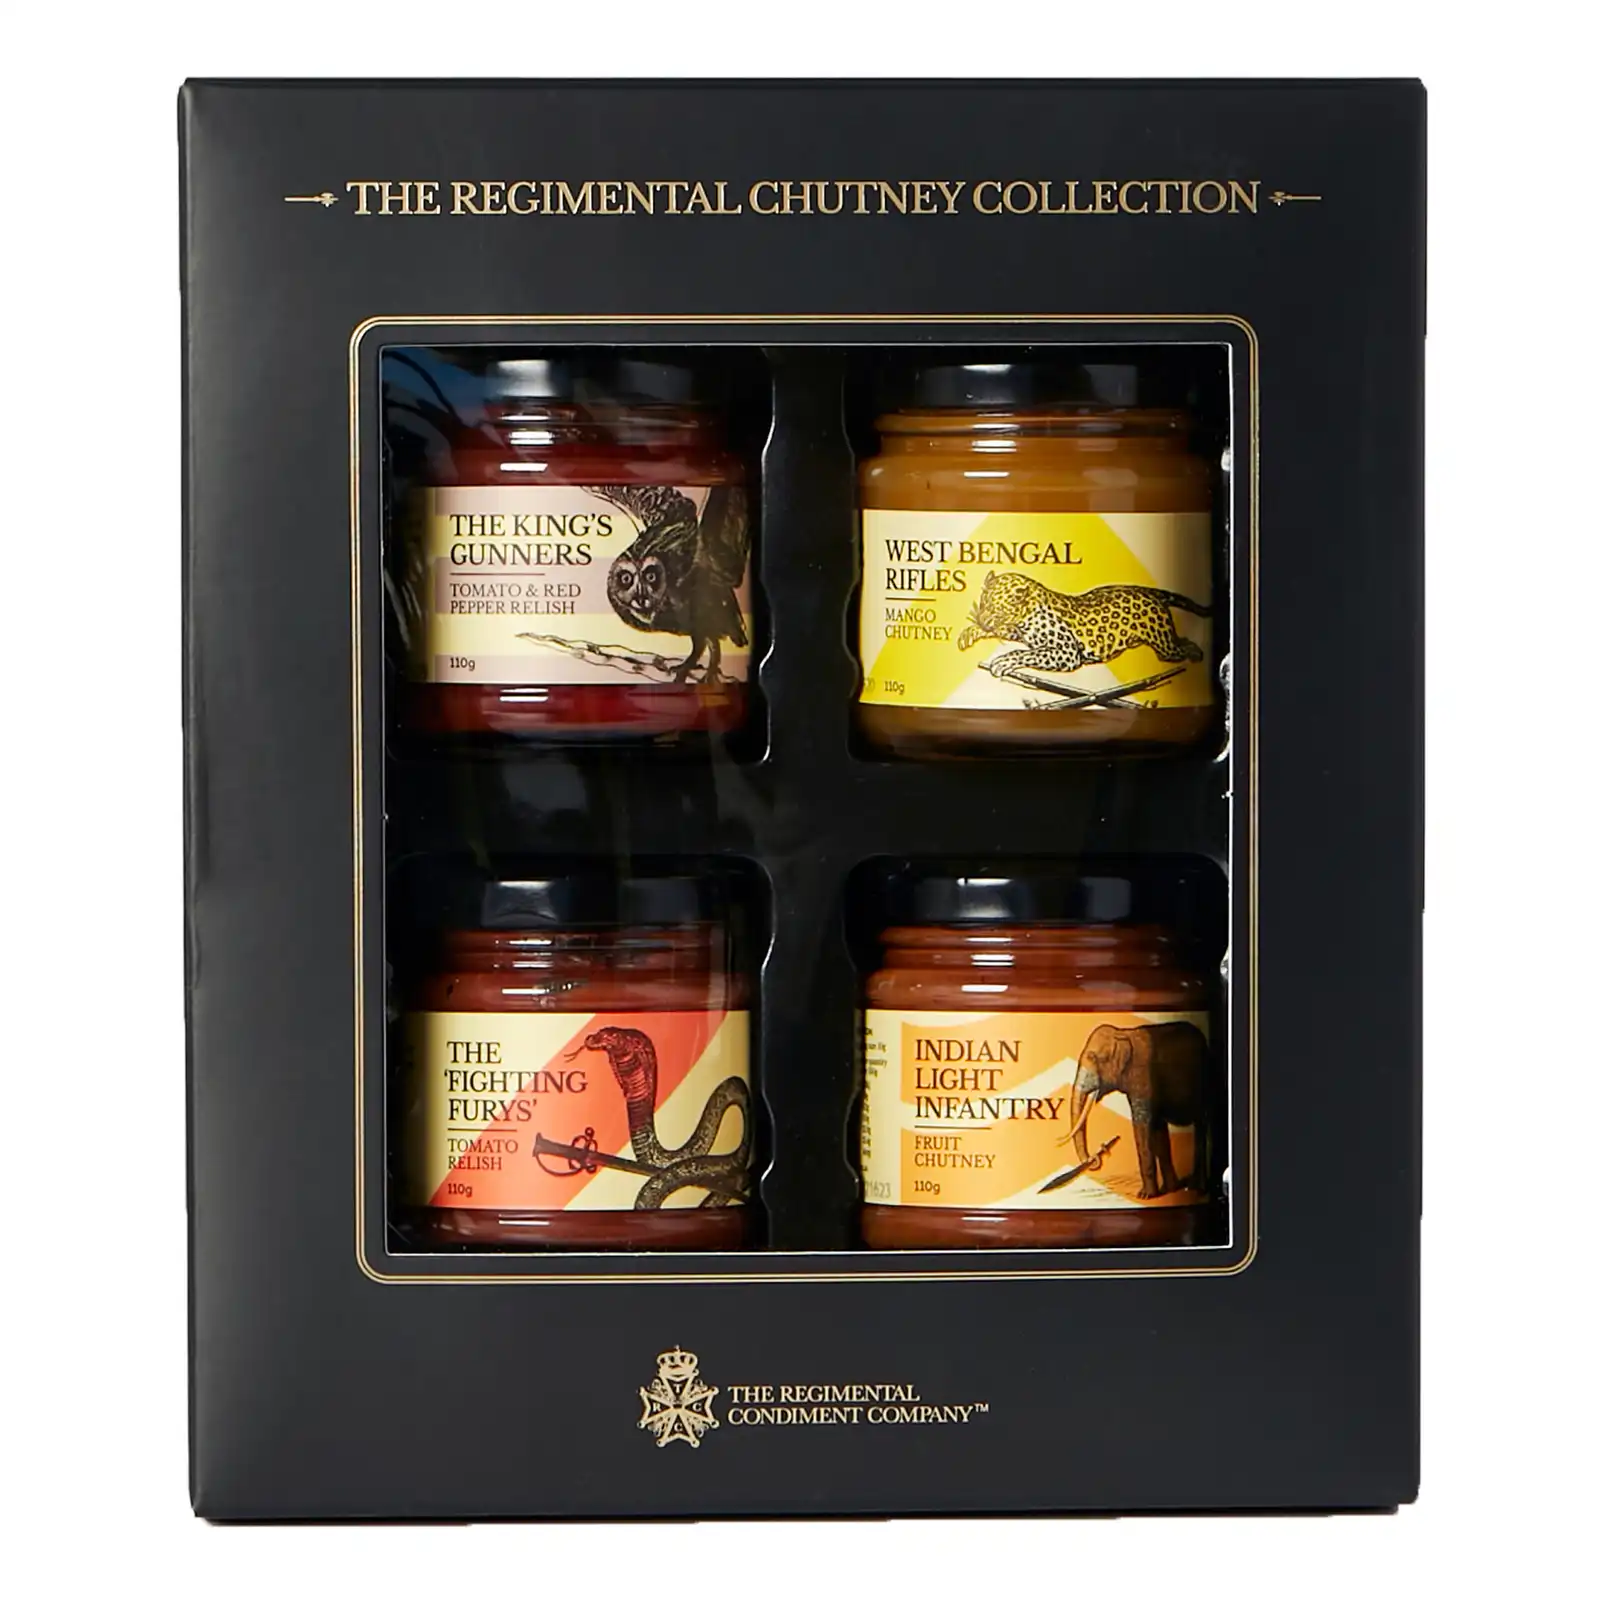 TRCC - The Regimental Chutney Collection - 4 Pack Chutney Collection